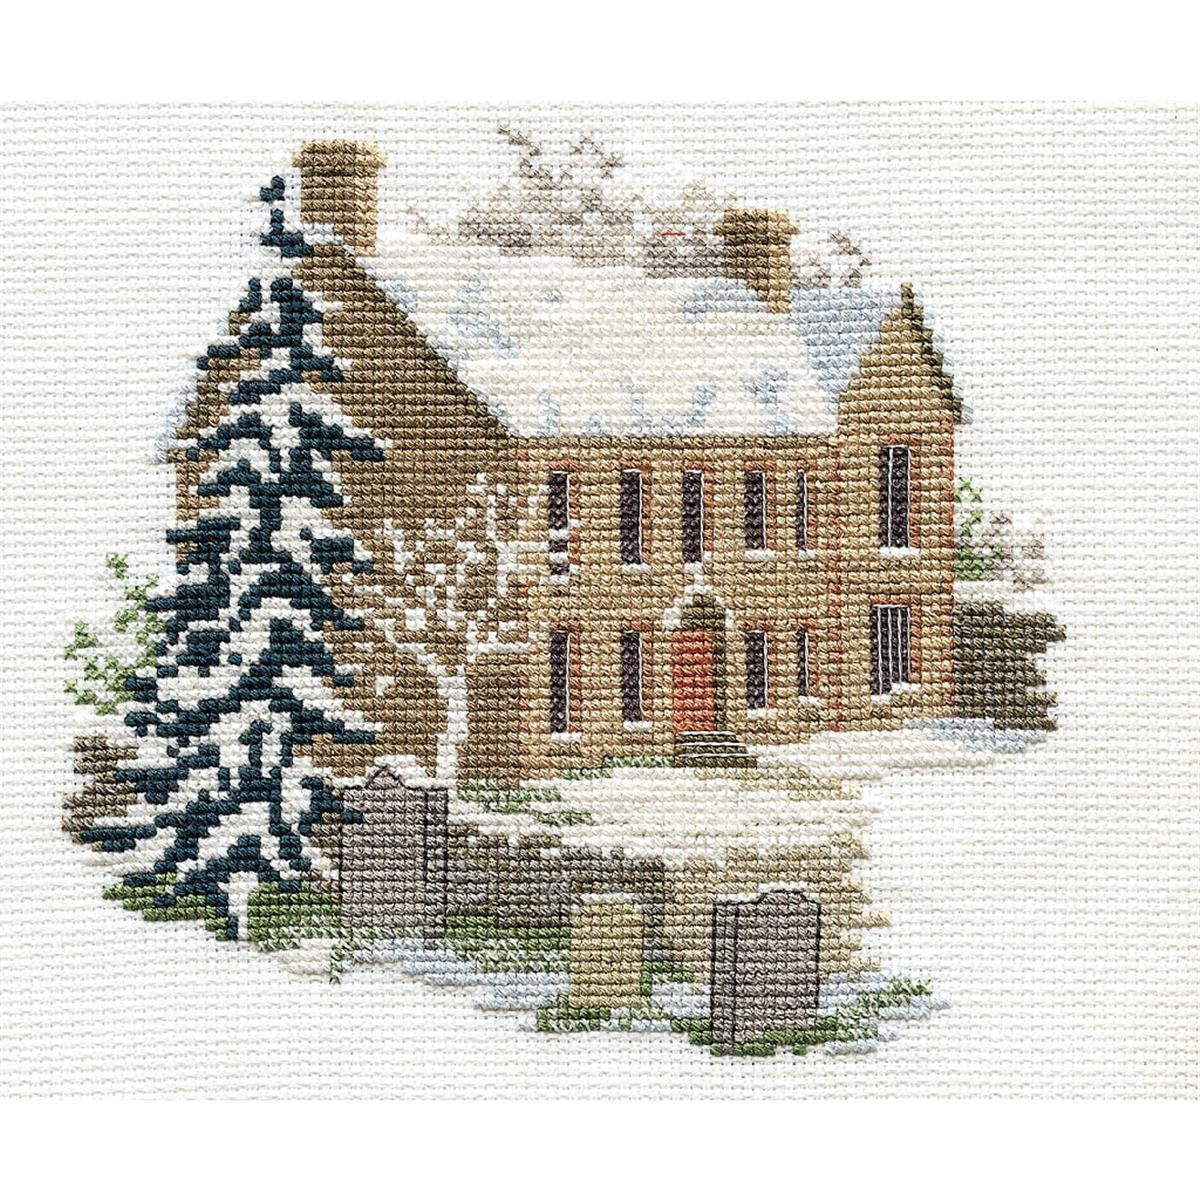 An embroidery picture from the Bothy Threads embroidery...